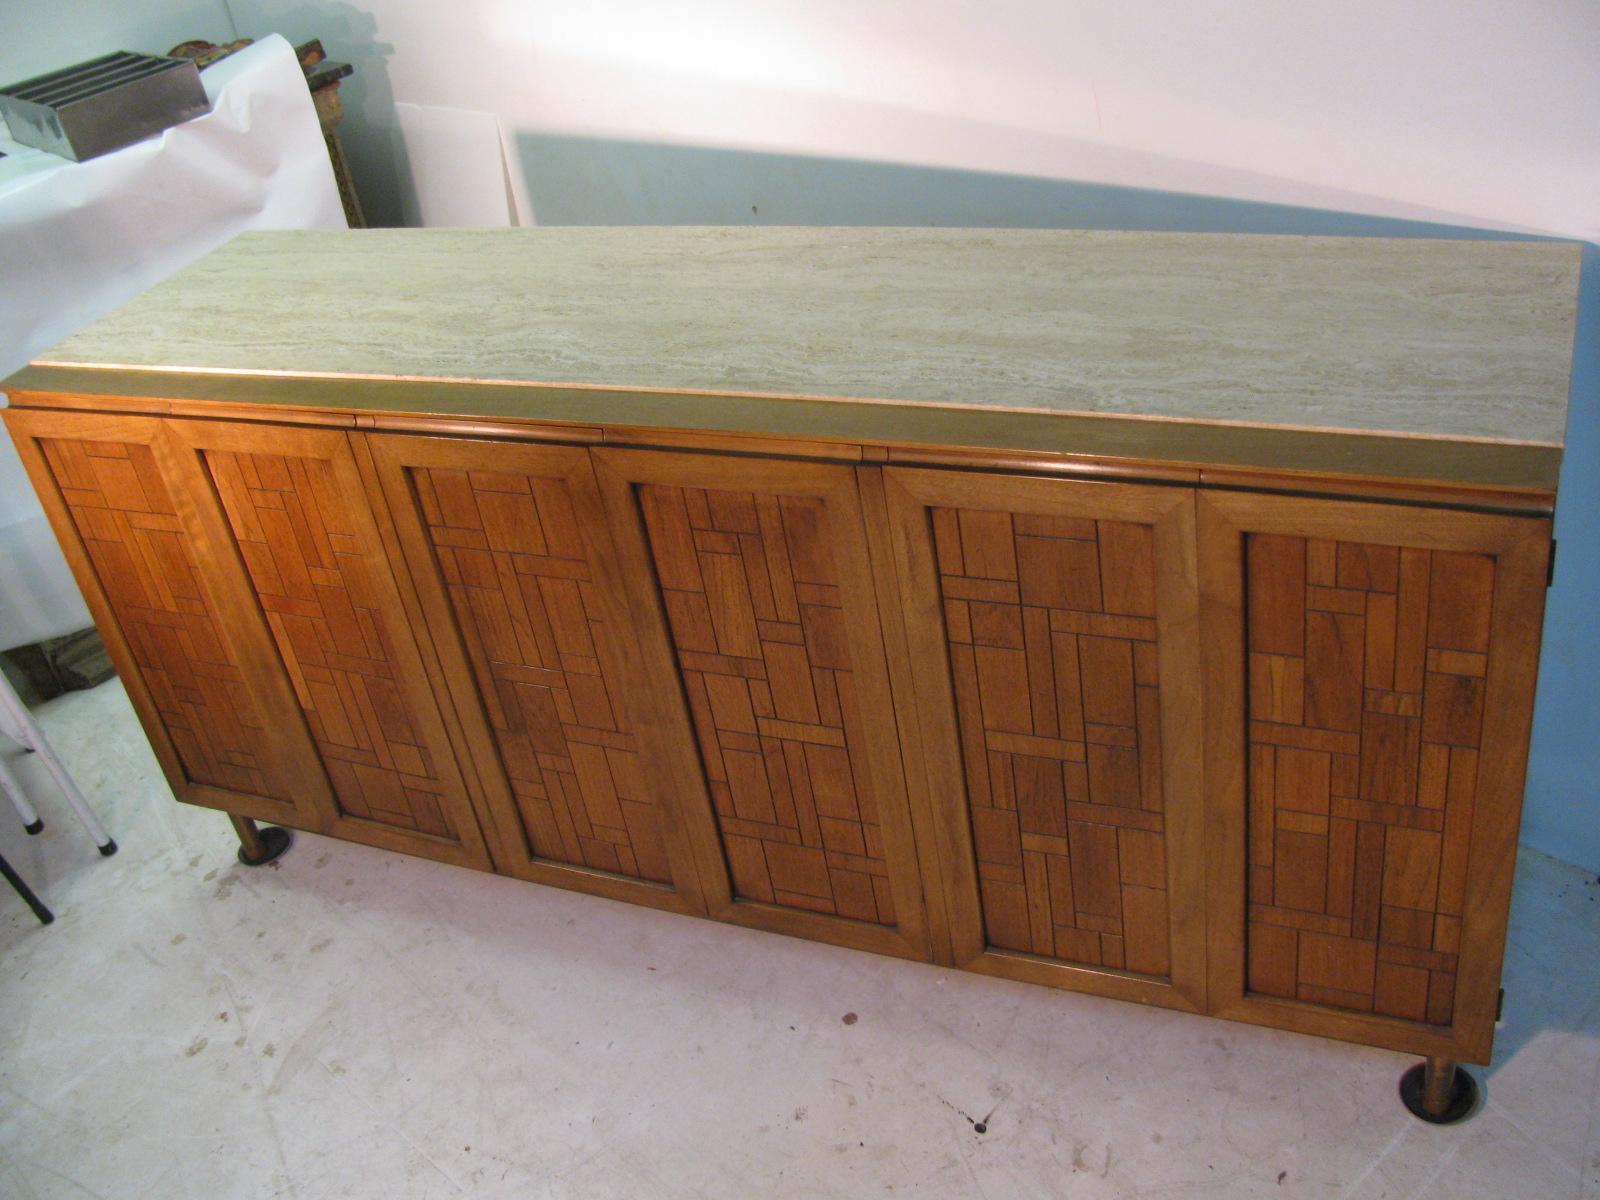 Fabulous credenza or dresser by Bert England. Walnut with travertine marble top, has 6 drawers which open to reveal 8 pull out drawers with sculpted handles. Brass stretcher and legs support the cabinet.